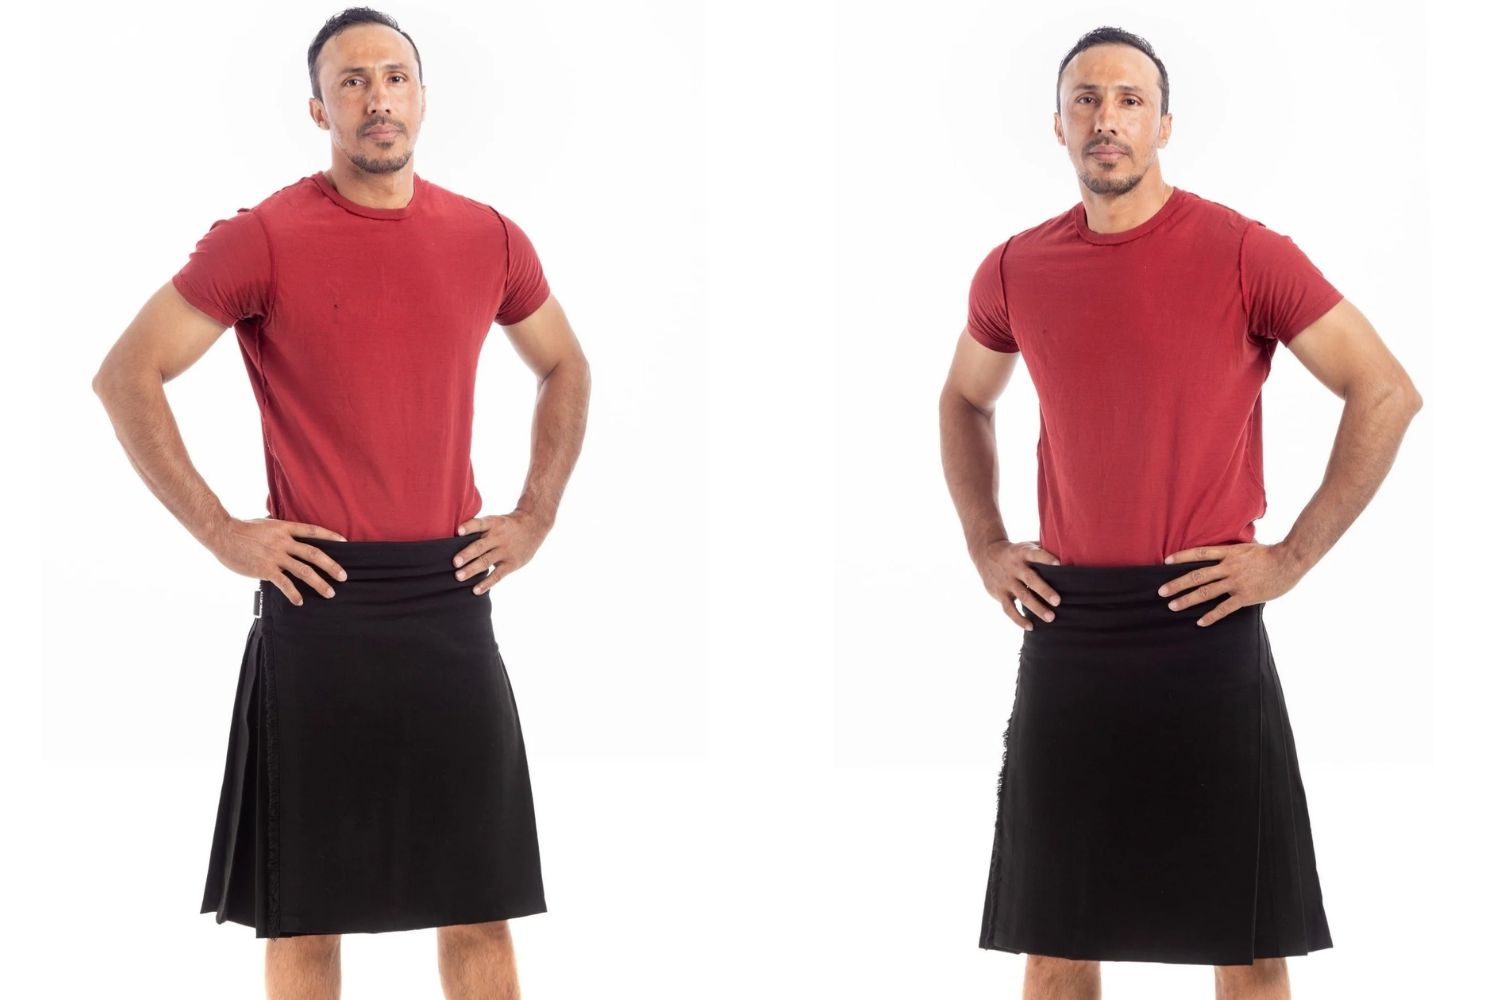 Redefining Style | How to Rock a Black Kilt Like a Fashion Icon